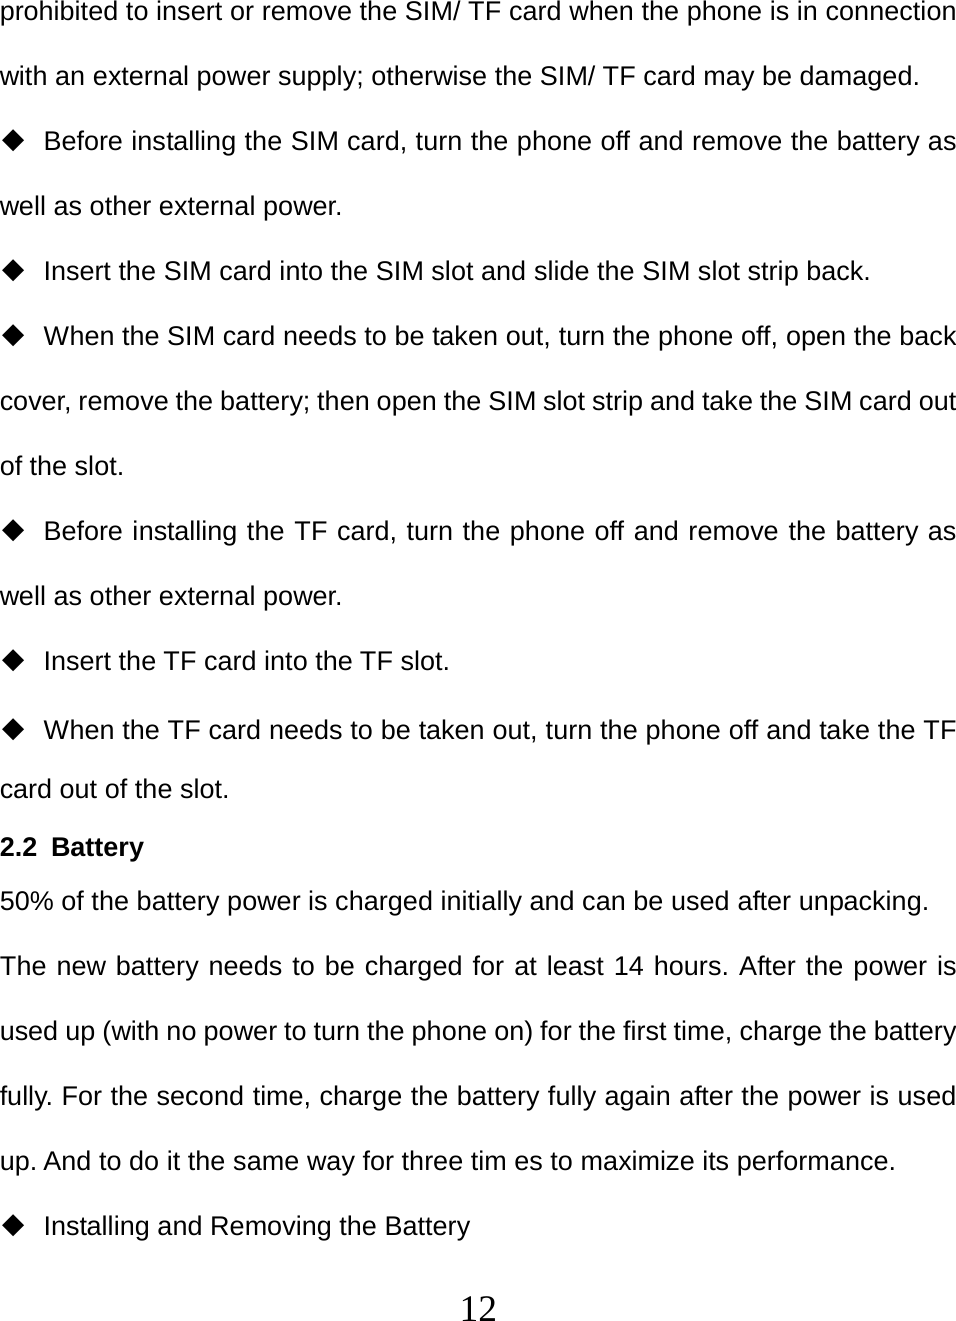   12prohibited to insert or remove the SIM/ TF card when the phone is in connection with an external power supply; otherwise the SIM/ TF card may be damaged.   Before installing the SIM card, turn the phone off and remove the battery as well as other external power.   Insert the SIM card into the SIM slot and slide the SIM slot strip back.   When the SIM card needs to be taken out, turn the phone off, open the back cover, remove the battery; then open the SIM slot strip and take the SIM card out of the slot.   Before installing the TF card, turn the phone off and remove the battery as well as other external power.   Insert the TF card into the TF slot.   When the TF card needs to be taken out, turn the phone off and take the TF card out of the slot. 2.2 Battery  50% of the battery power is charged initially and can be used after unpacking.   The new battery needs to be charged for at least 14 hours. After the power is used up (with no power to turn the phone on) for the first time, charge the battery fully. For the second time, charge the battery fully again after the power is used up. And to do it the same way for three tim es to maximize its performance.   Installing and Removing the Battery 